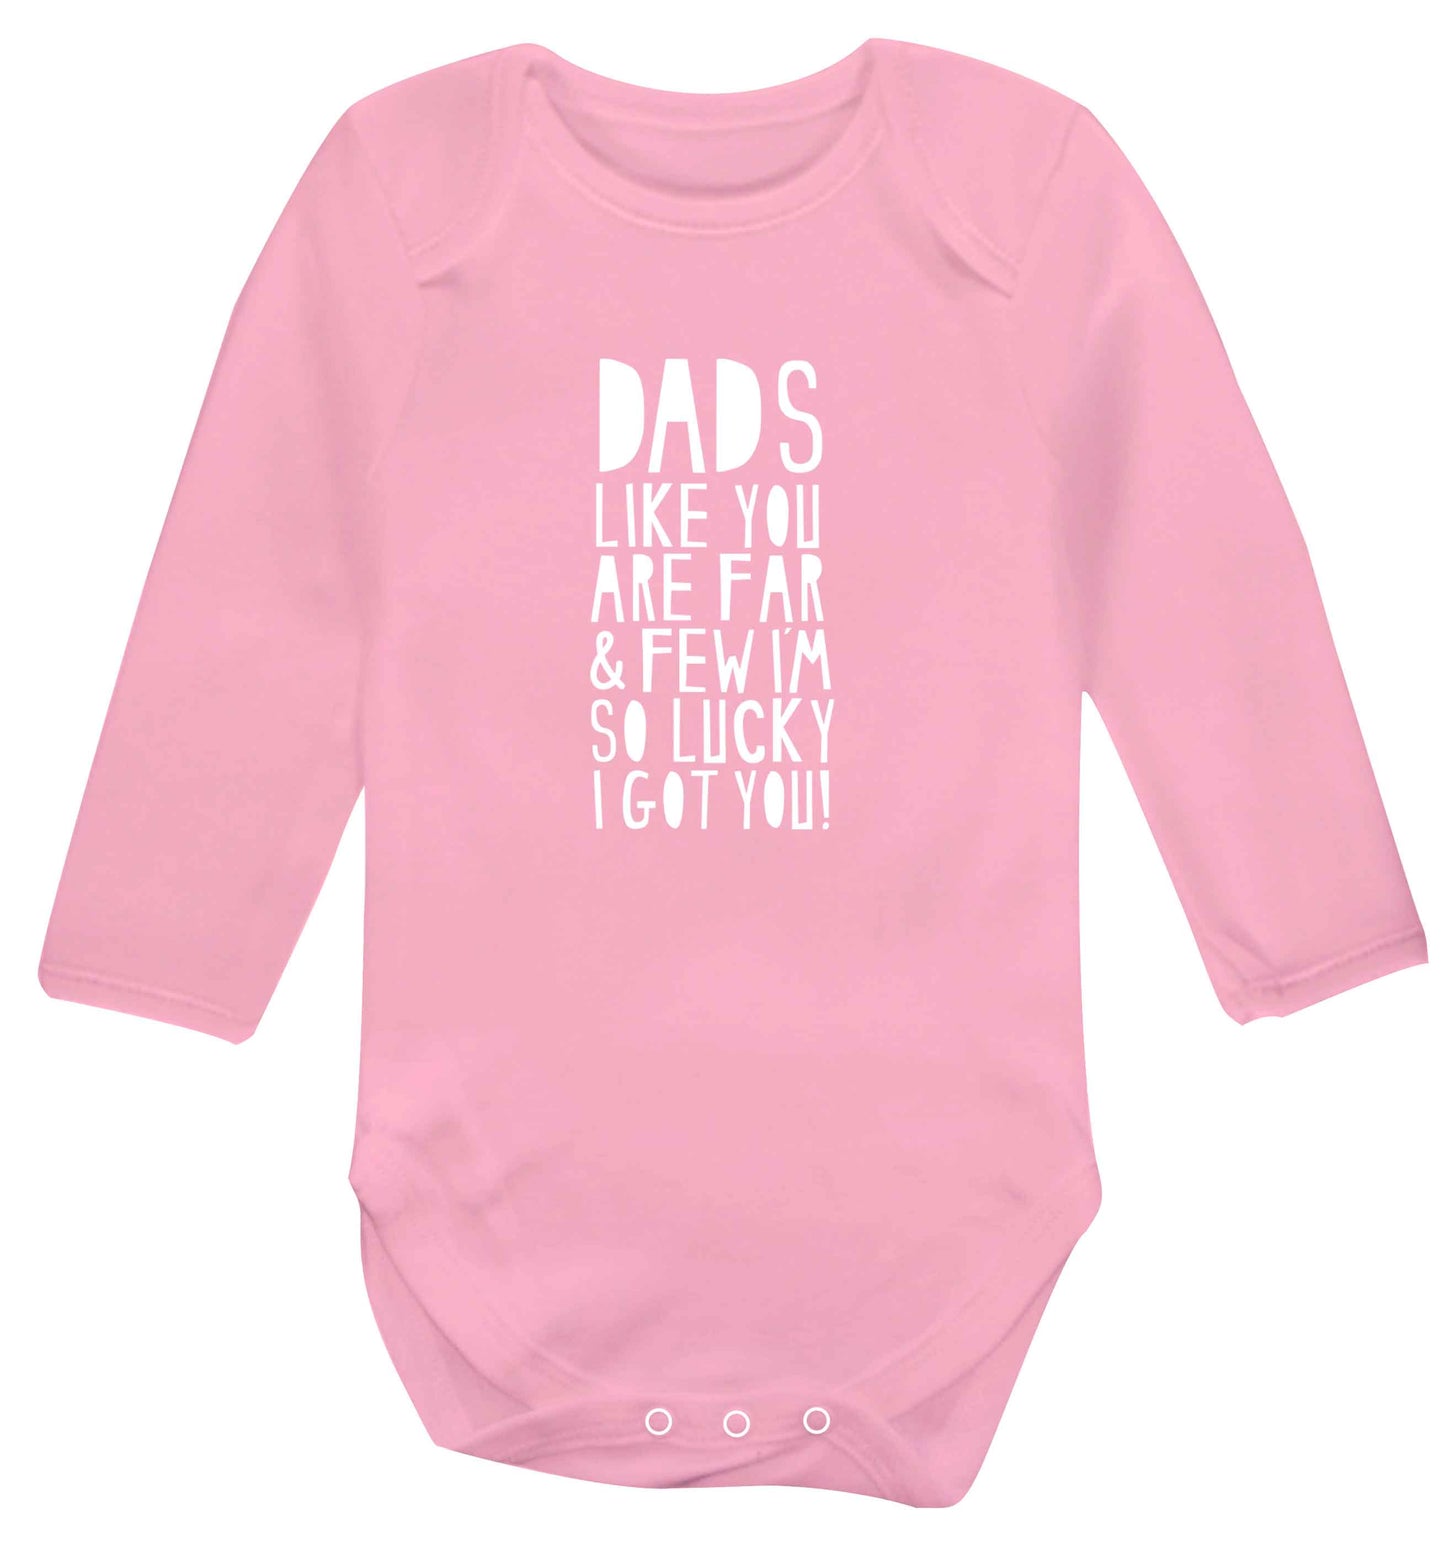 Dads like you are far and few I'm so luck I got you! baby vest long sleeved pale pink 6-12 months